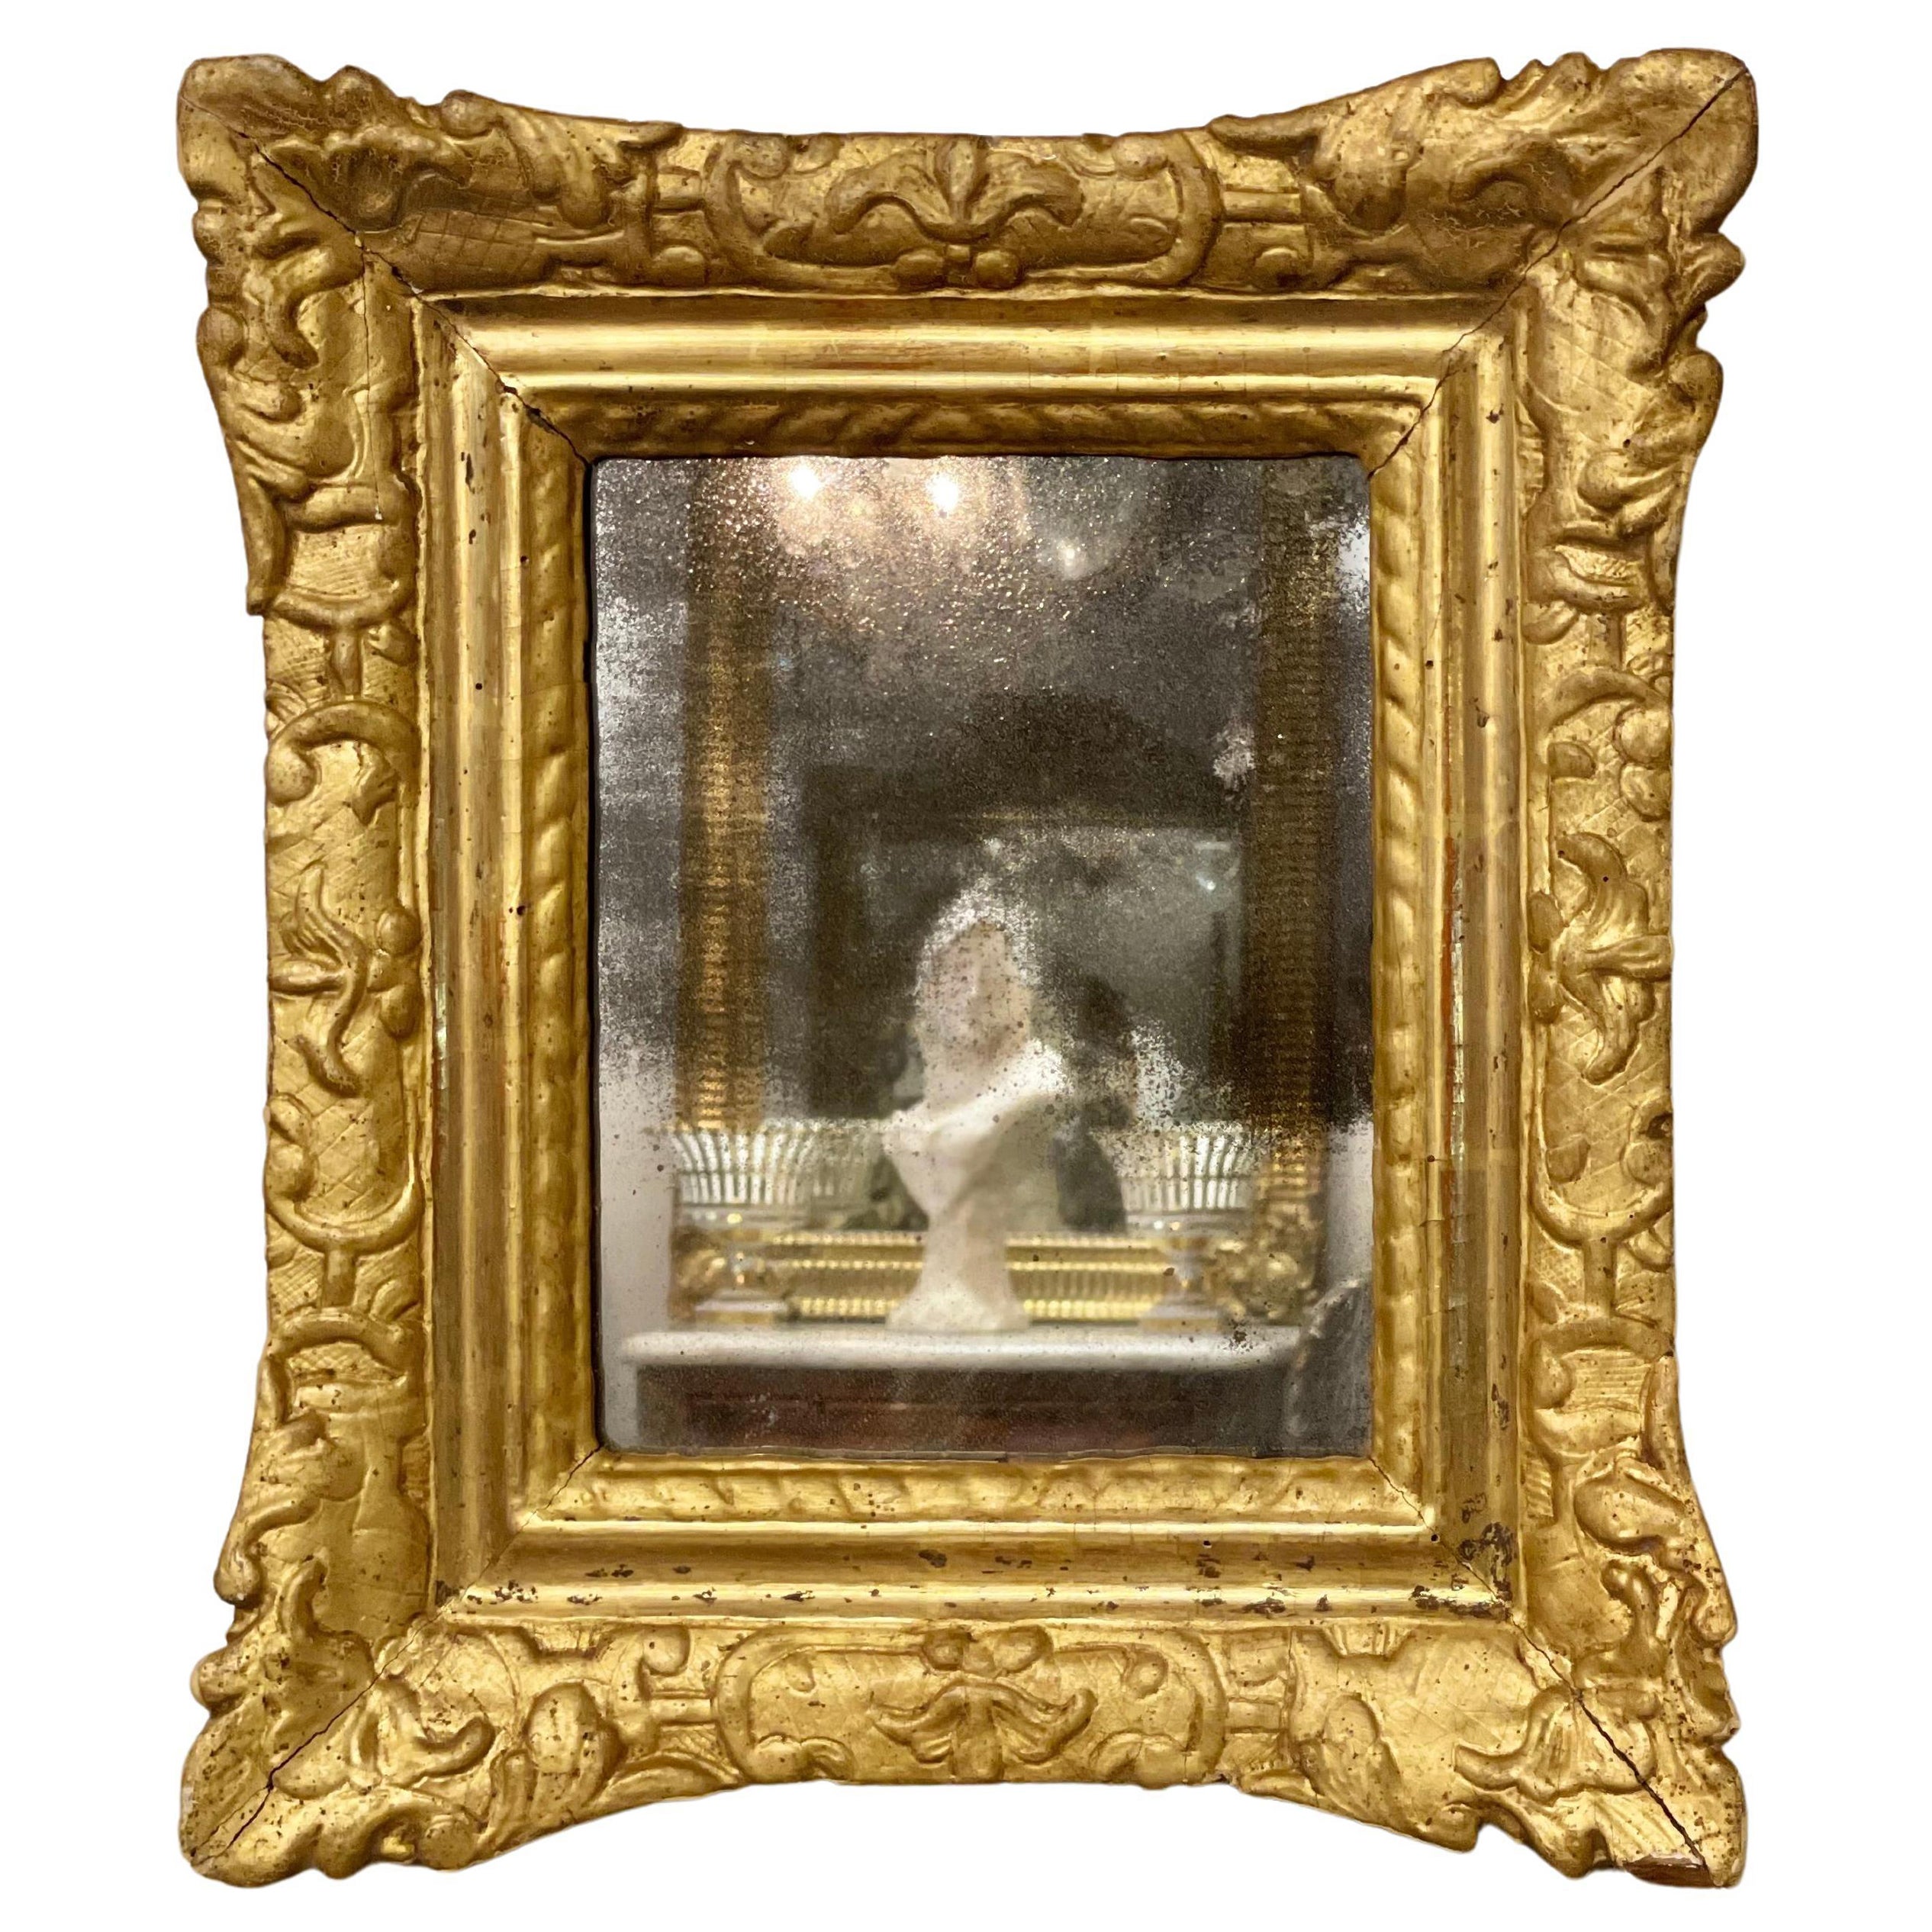 18th Century Giltwood Wall Mirror, with An Ornate Flared-Cornered 